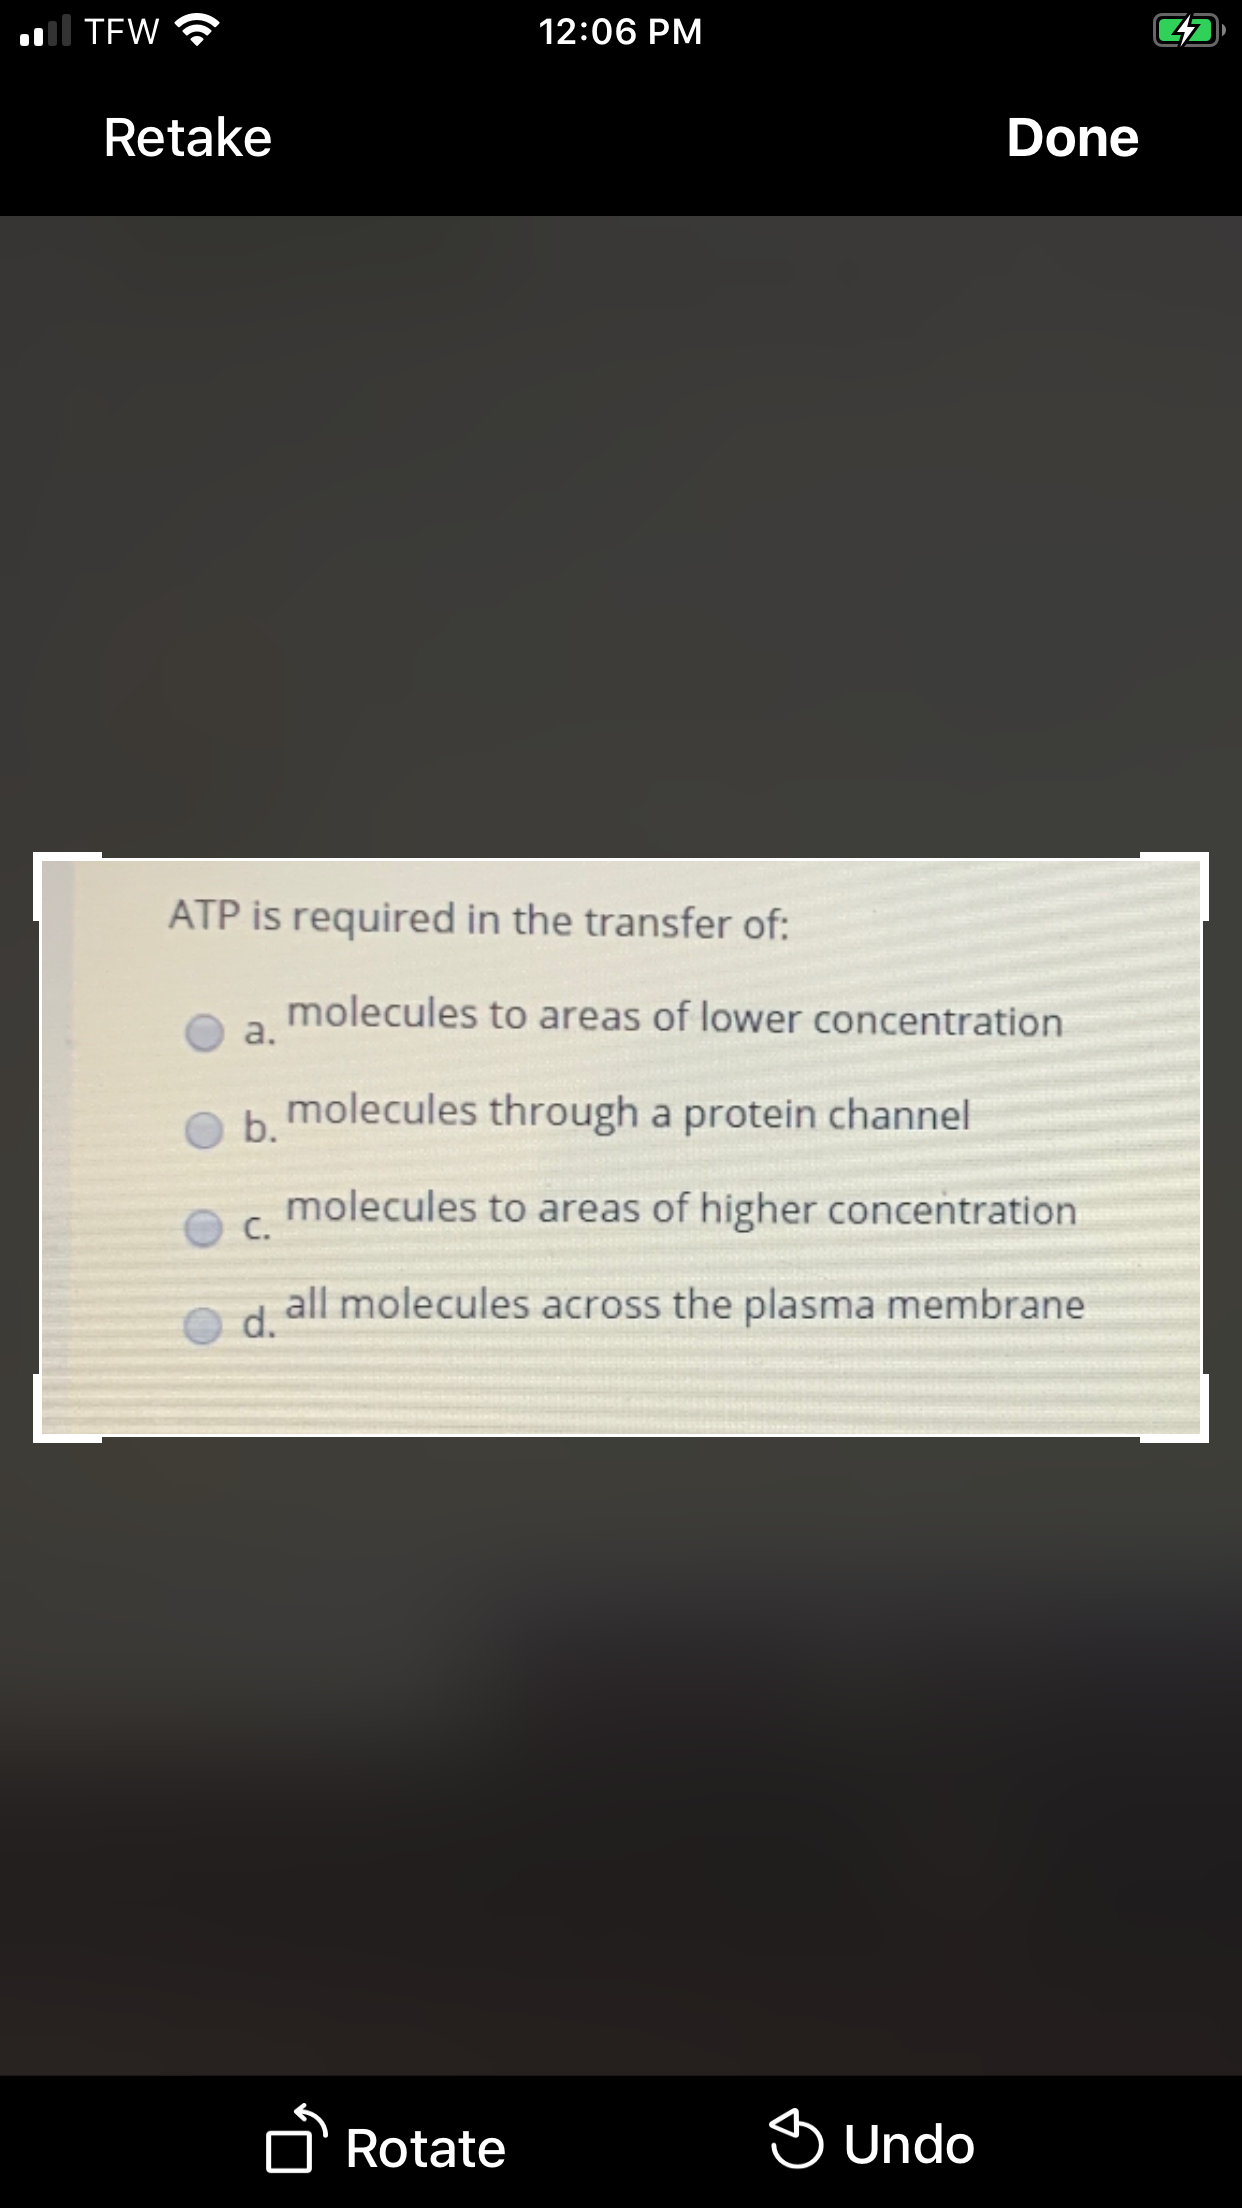 al TEW
12:06 PM
Retake
Done
ATP is required in the transfer of:
molecules to areas of lower concentration
a.
b molecules through a protein channel
molecules to areas of higher concentration
C.
all molecules across the plasma membrane
d.
n Rotate
S Undo
